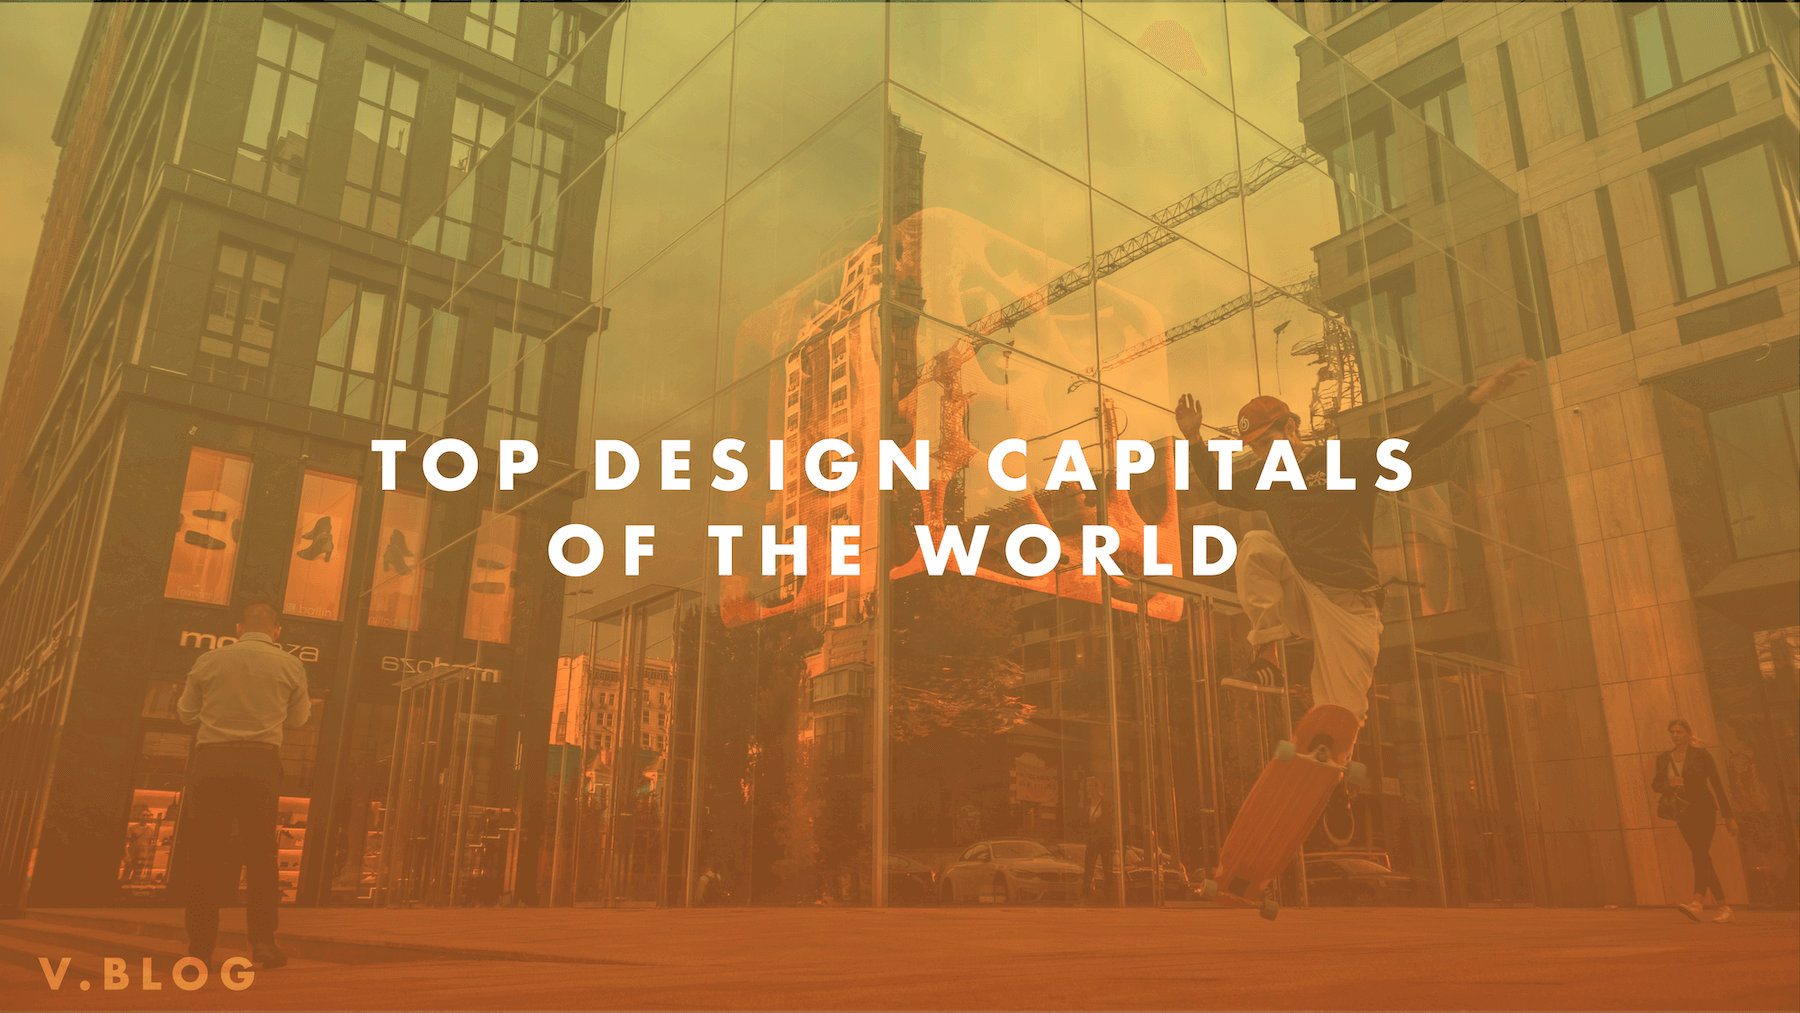 Top design capitals of the world